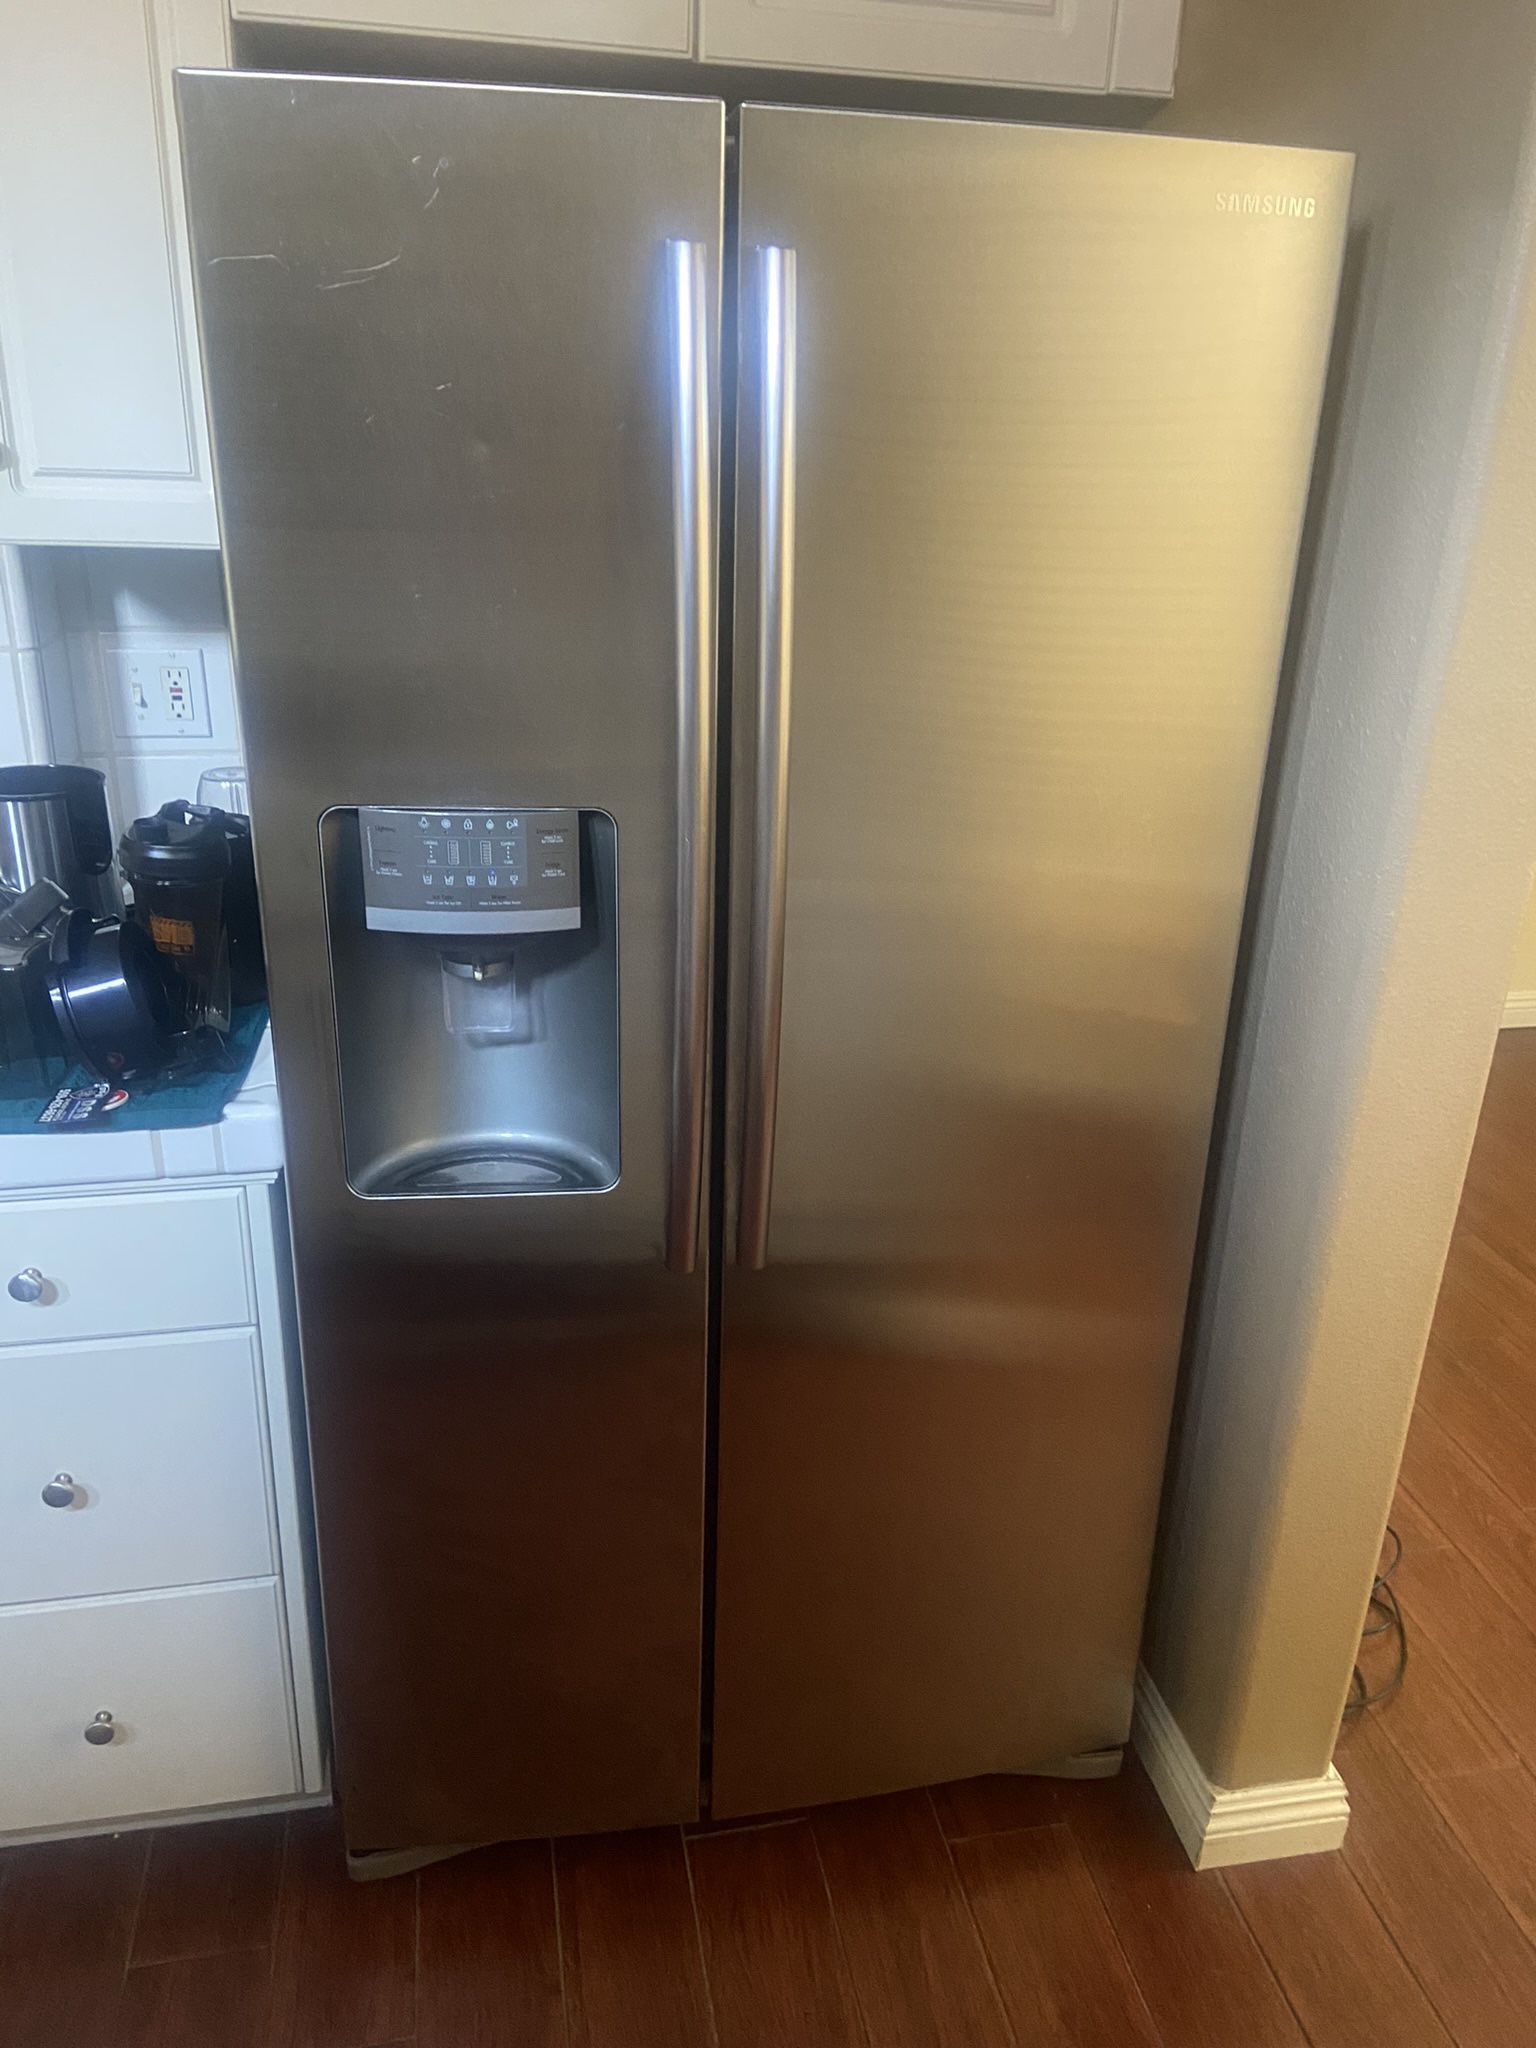 Samsung Fridge/freezer With Water And Ice Maker 